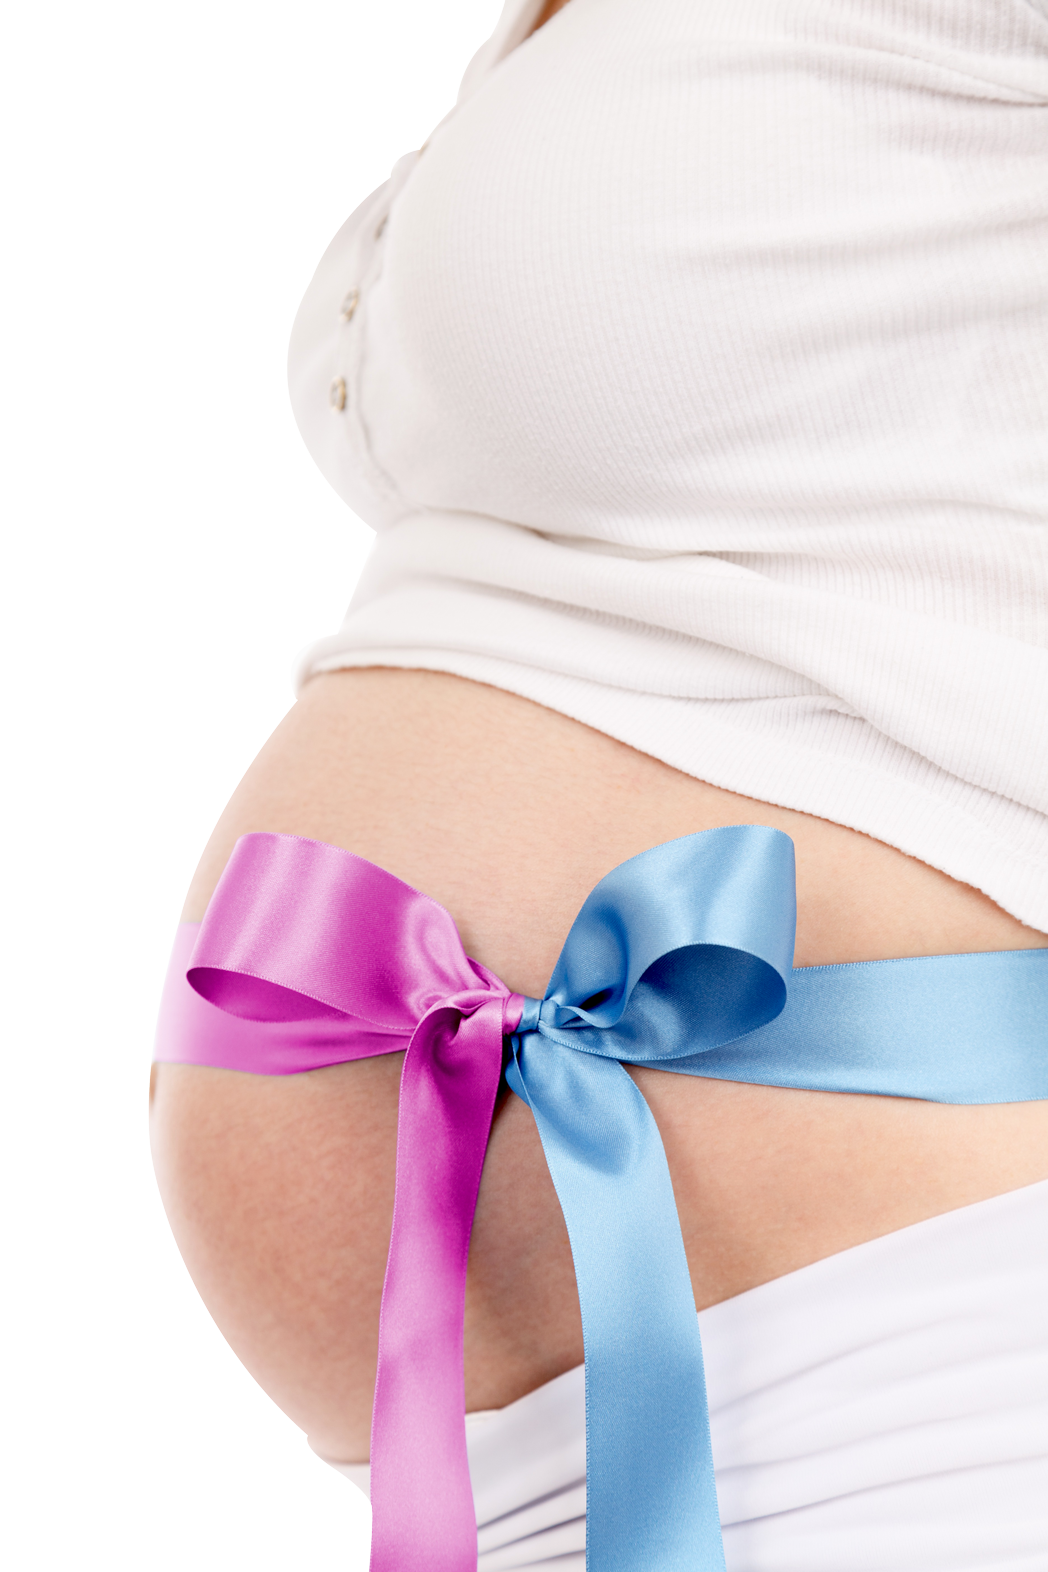 A Pregnant Woman With A Blue And Pink Bow On Her Belly